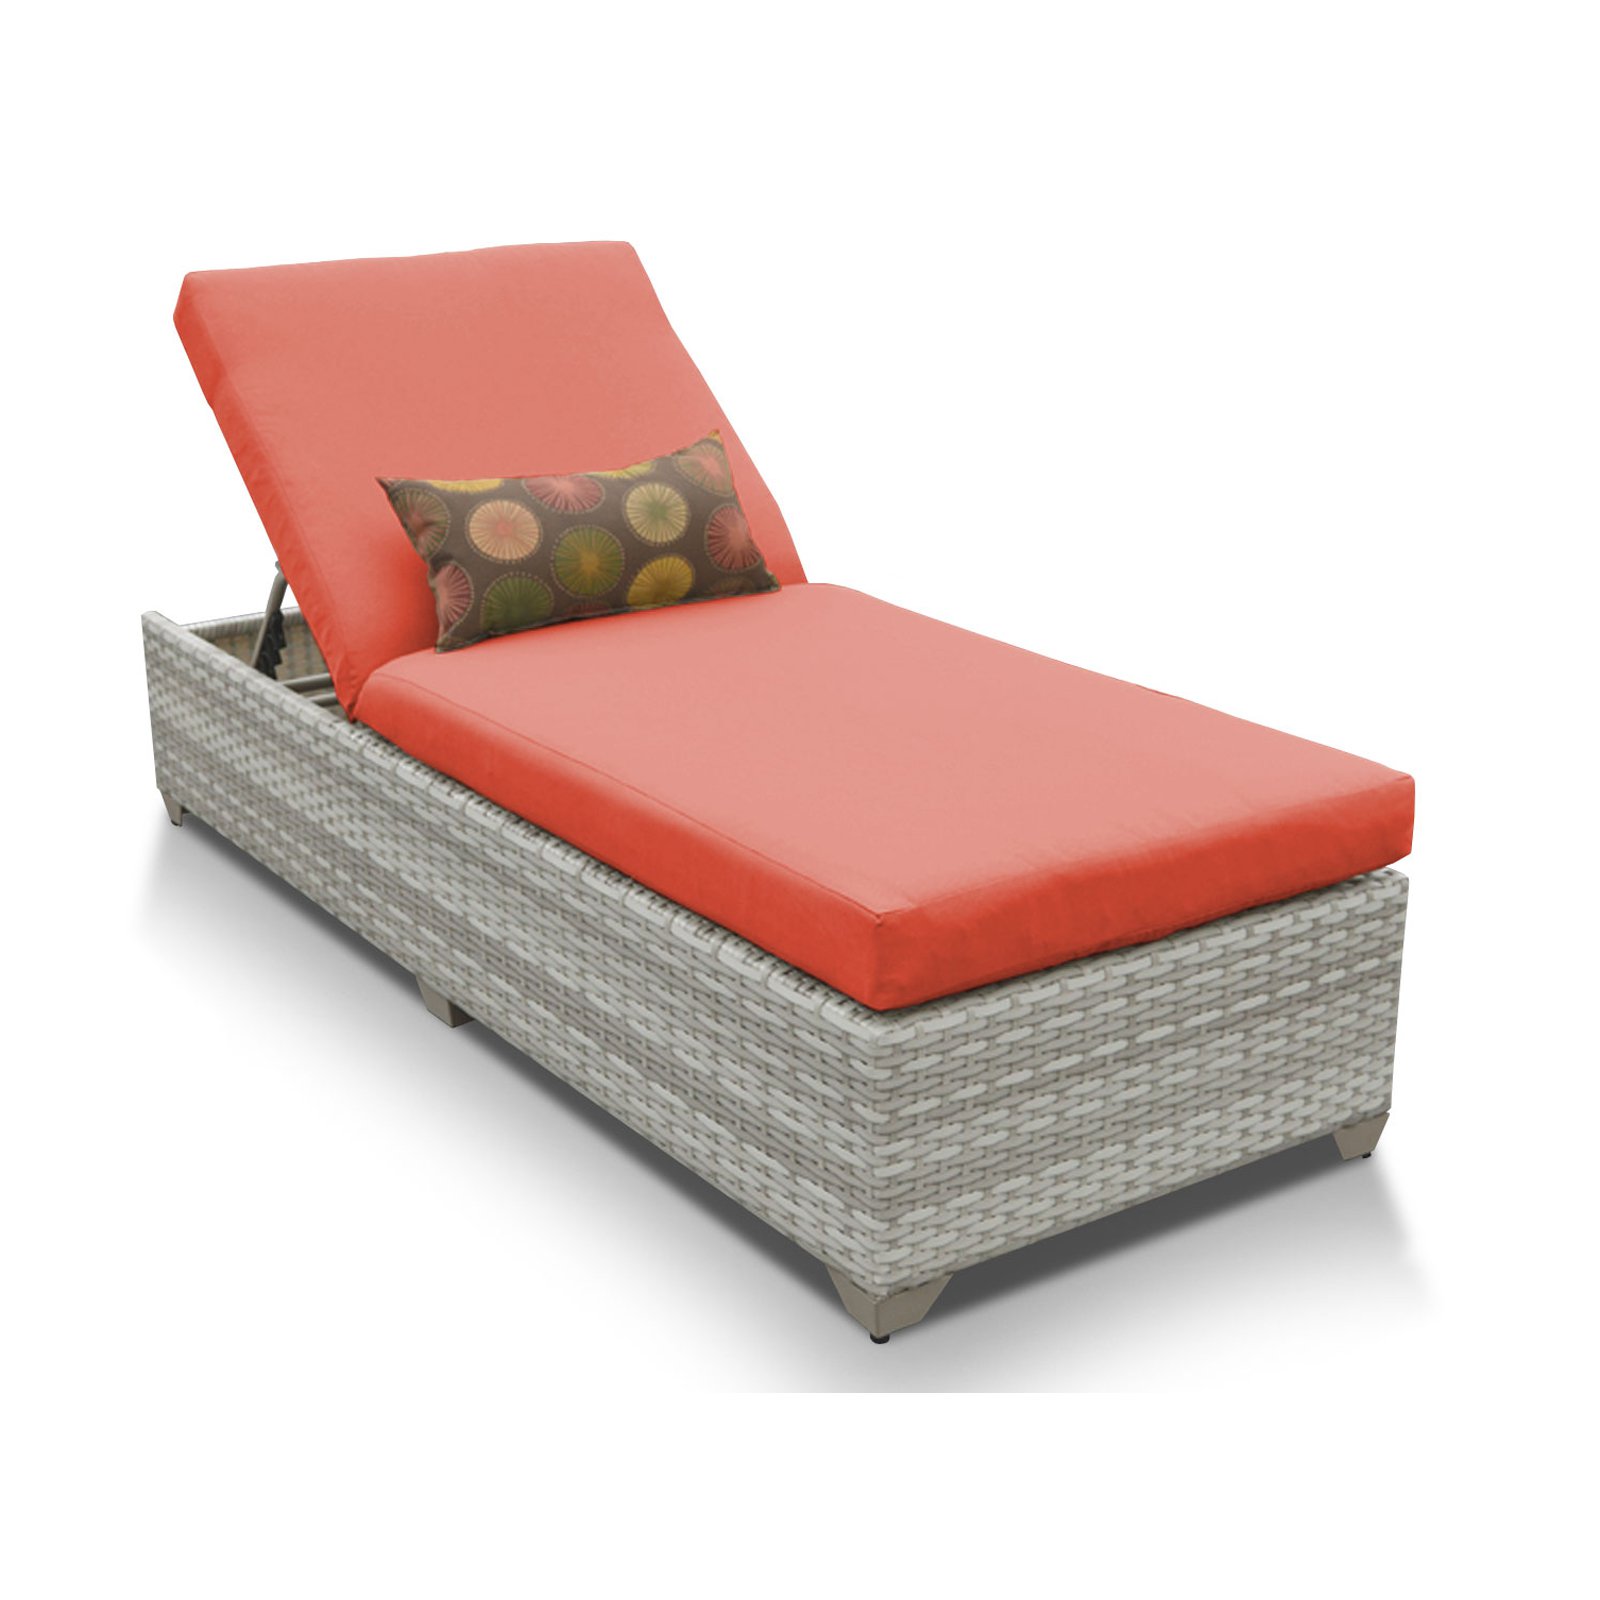 TK Classics Fairmont All-Weather Wicker Adjustable Chaise Lounge - image 1 of 2